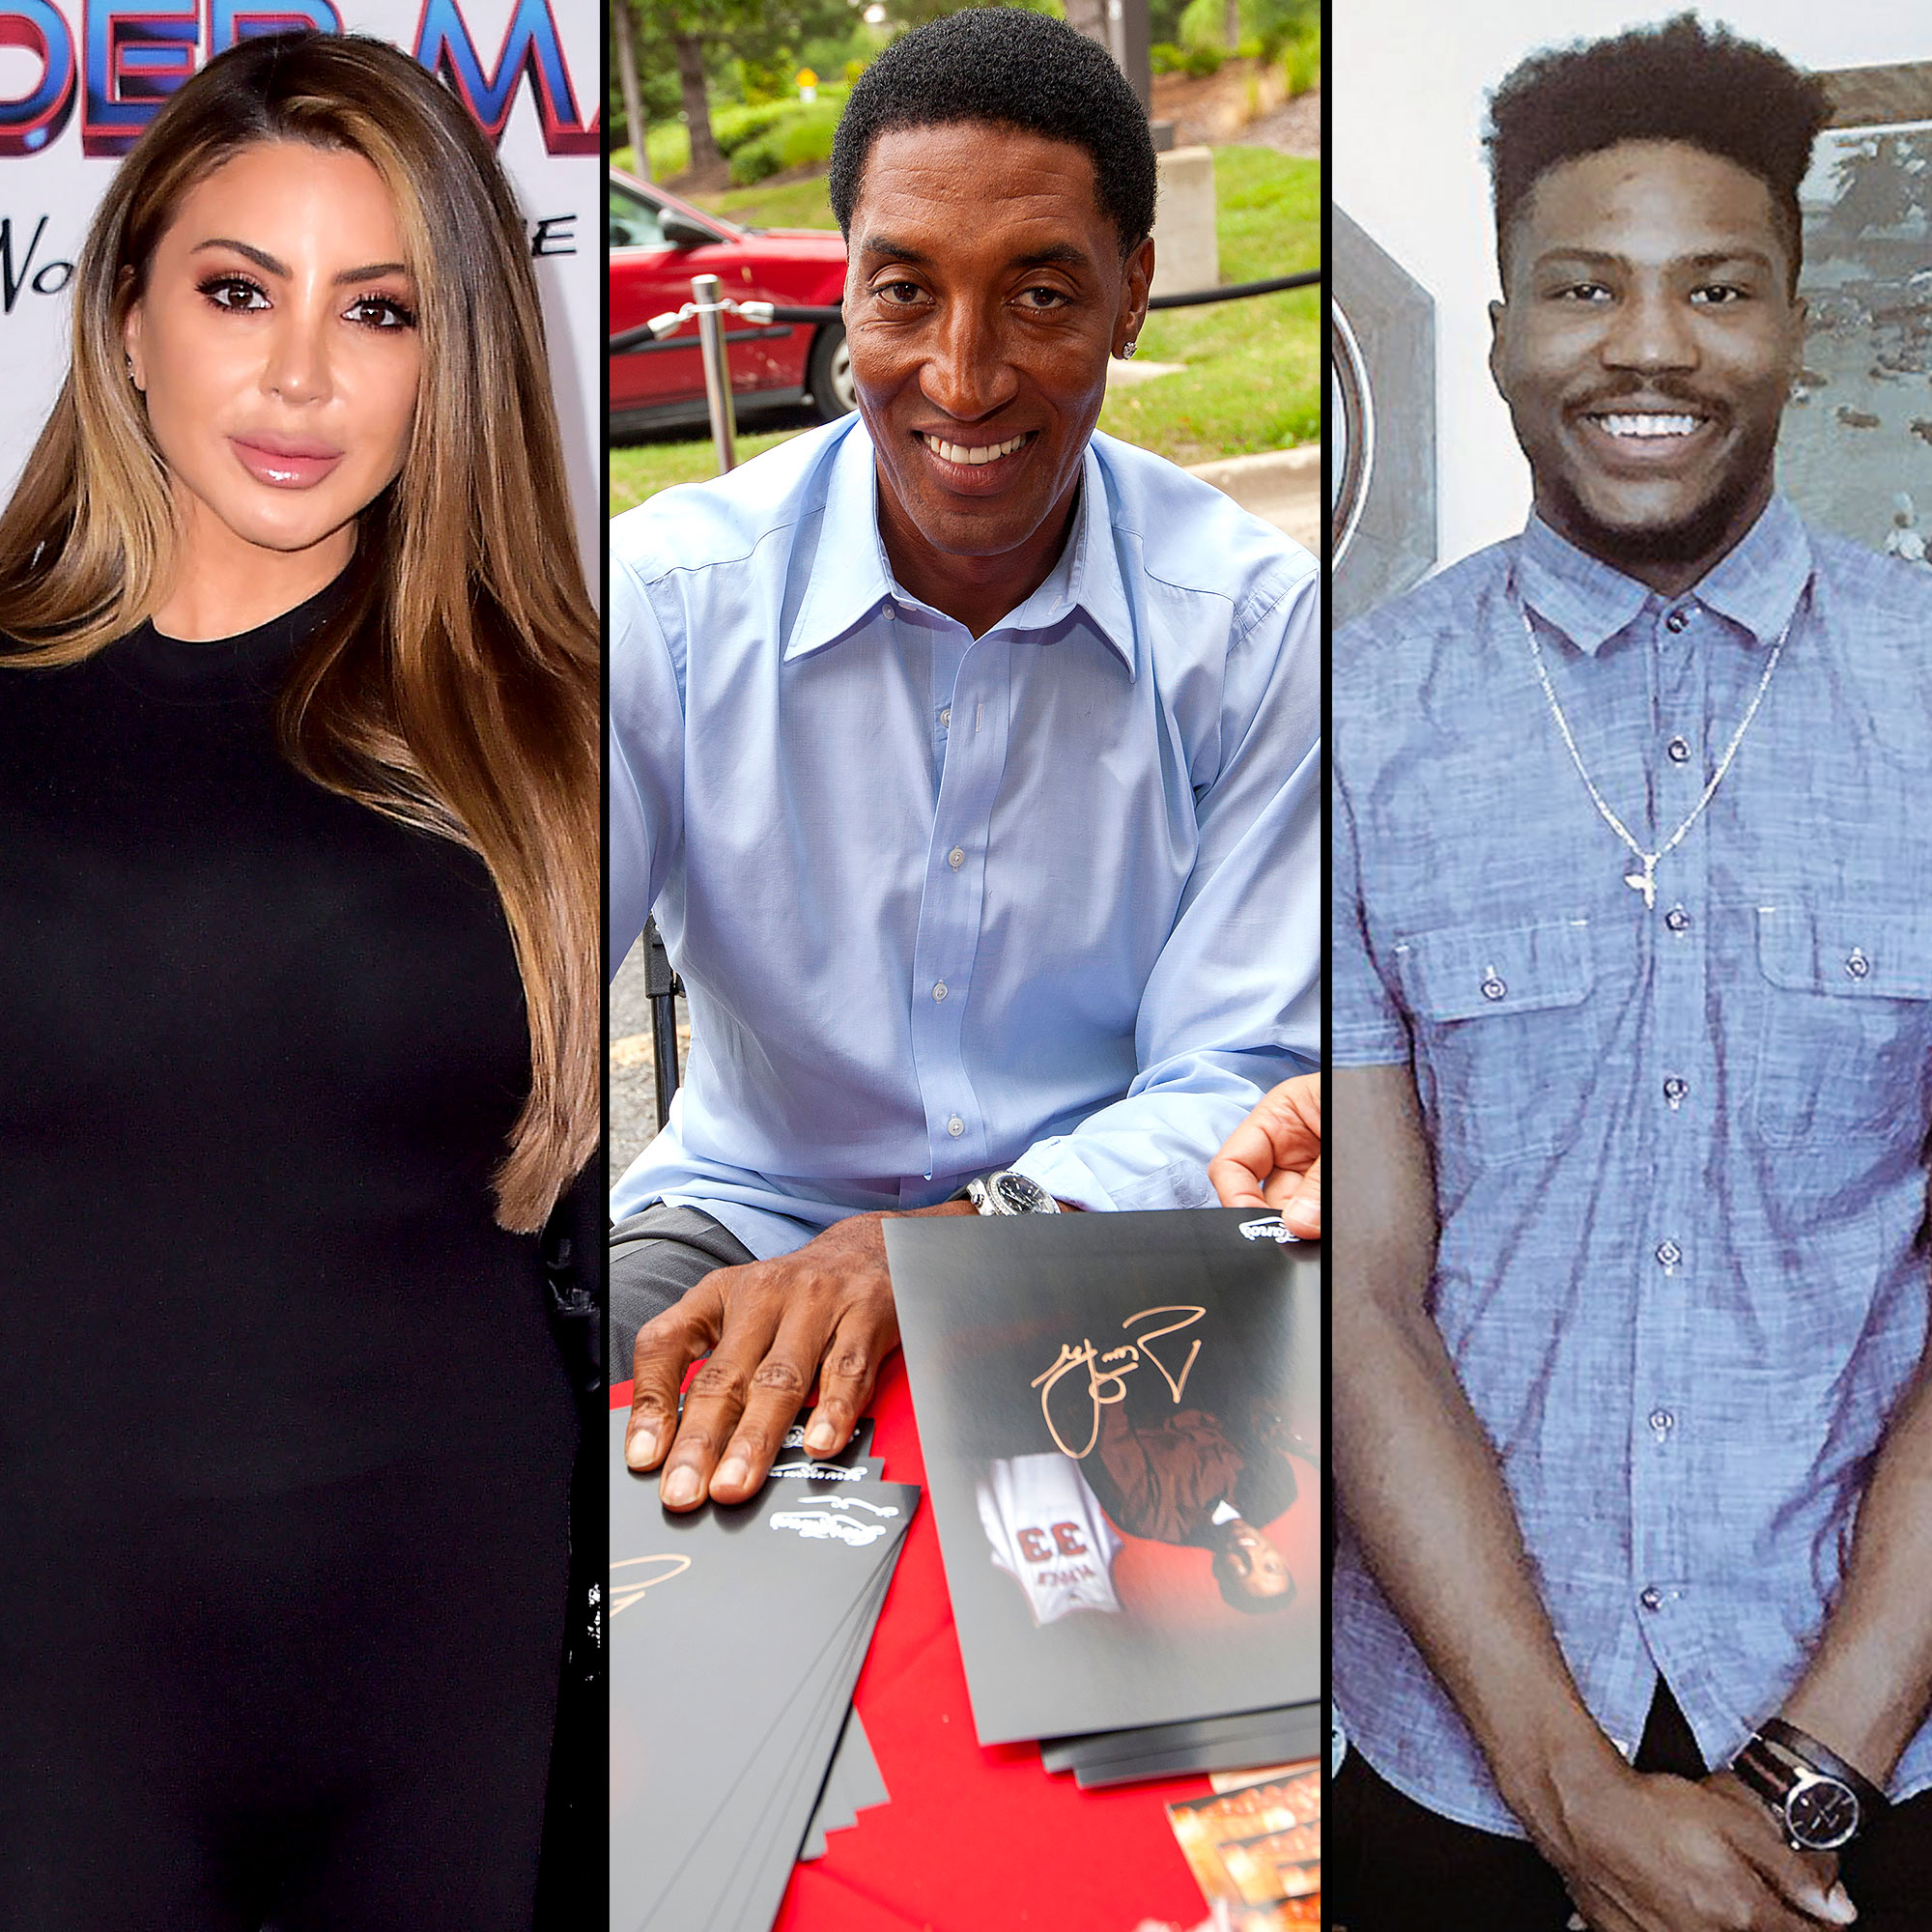 Larsa Pippen's Ex Gets Back With Estranged Wife